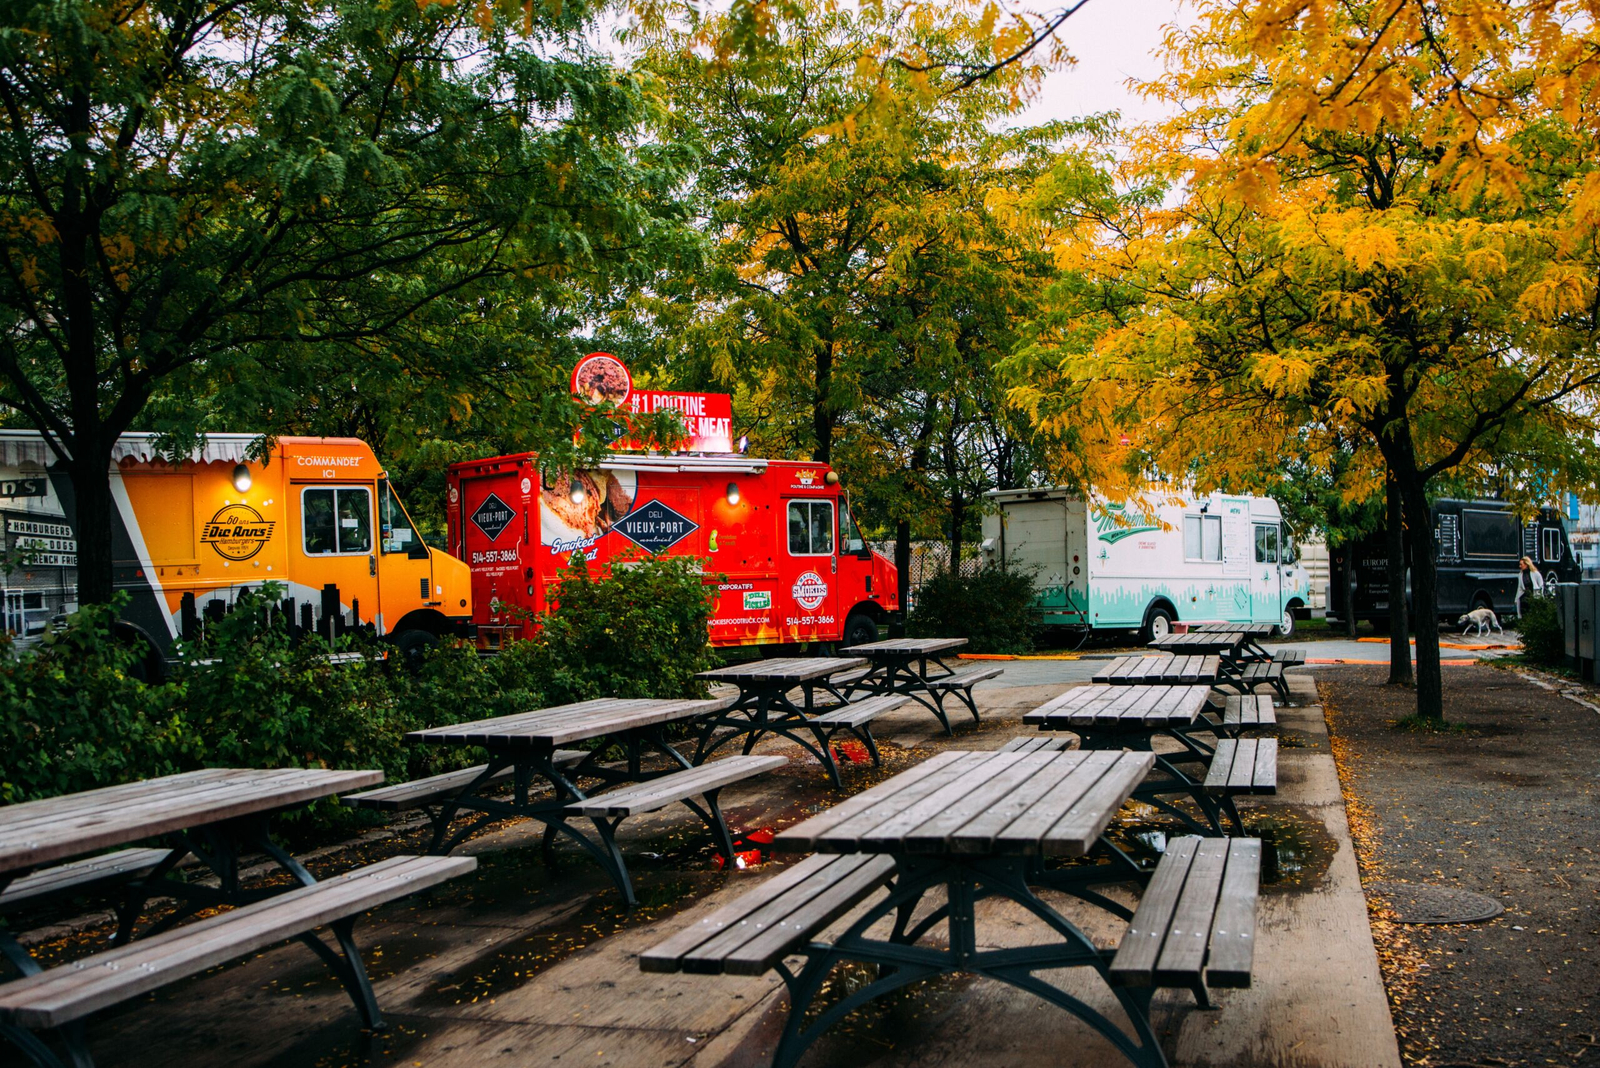 Explore the World of Food Trucks with Our Rental Options